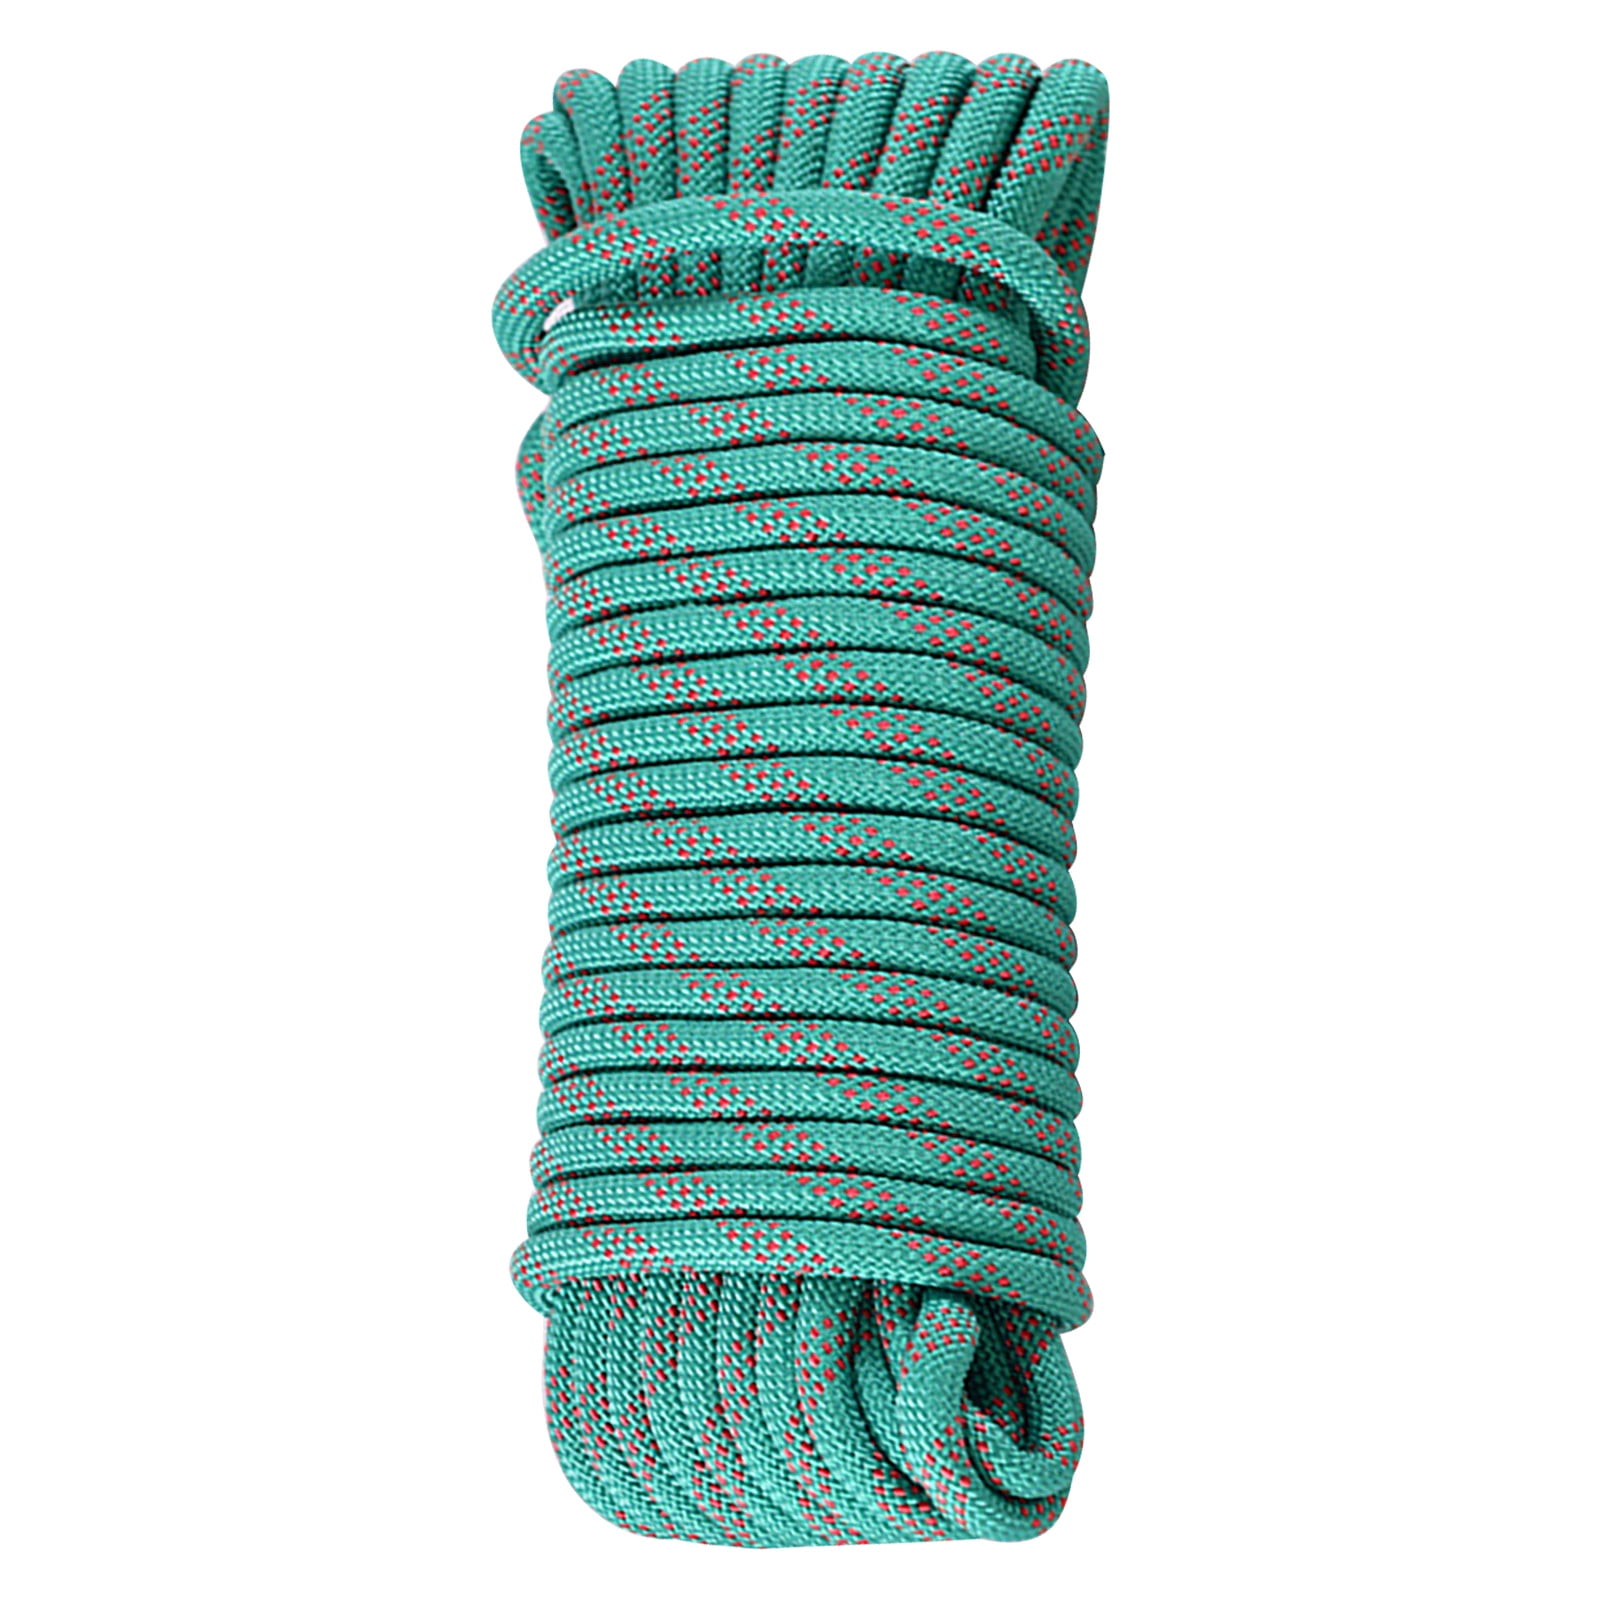 Polypropylene Rope Braided Cord Woven Twine Boating Camping Climbing BLUE 